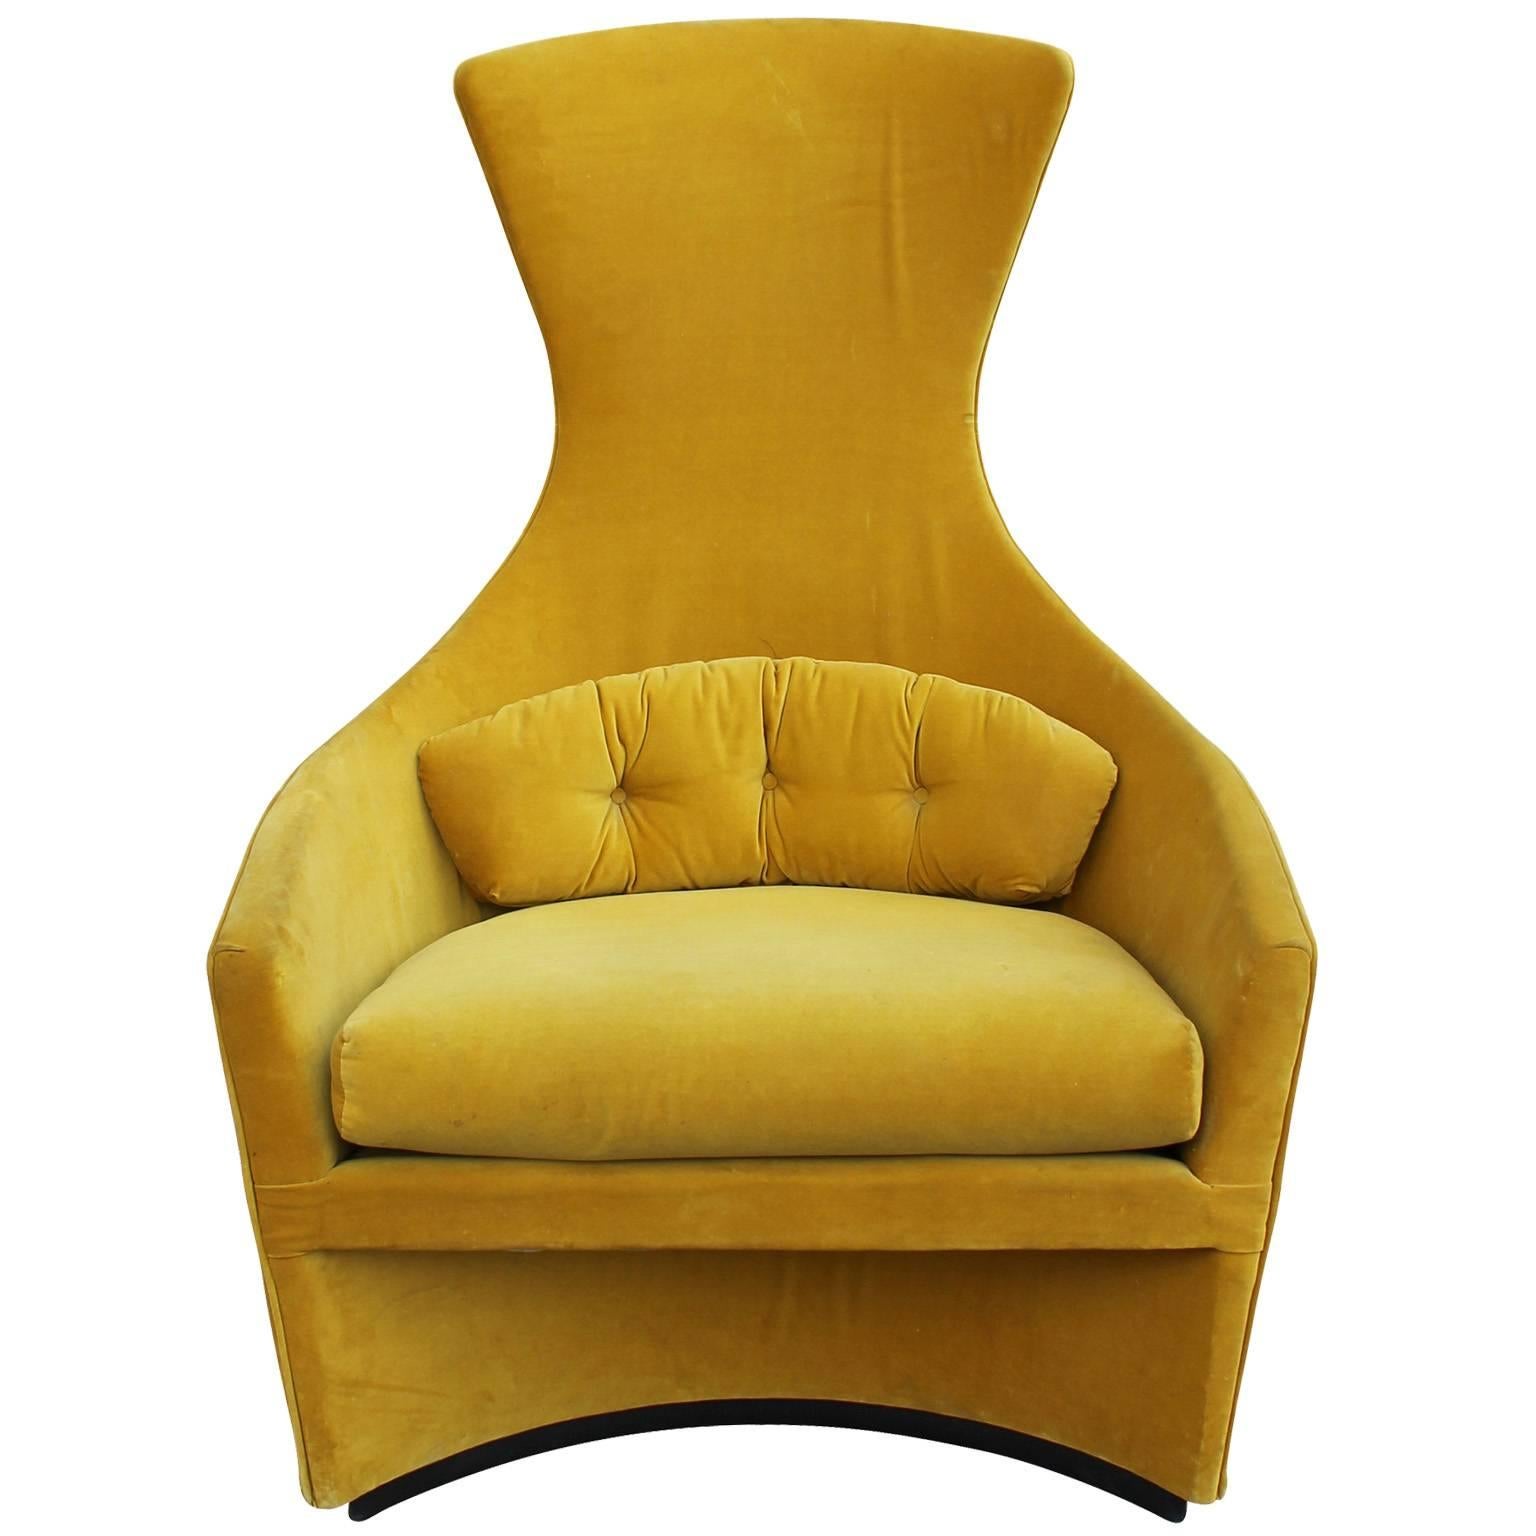 Unusual pair of lounge chairs by Adrian Pearsall for Craft Associates. Chairs are upholstered in original mustard velvet. A half moon shaped base ads interest to the piece while a sculptural back brings the eye up. Upholstery is in vintage condition